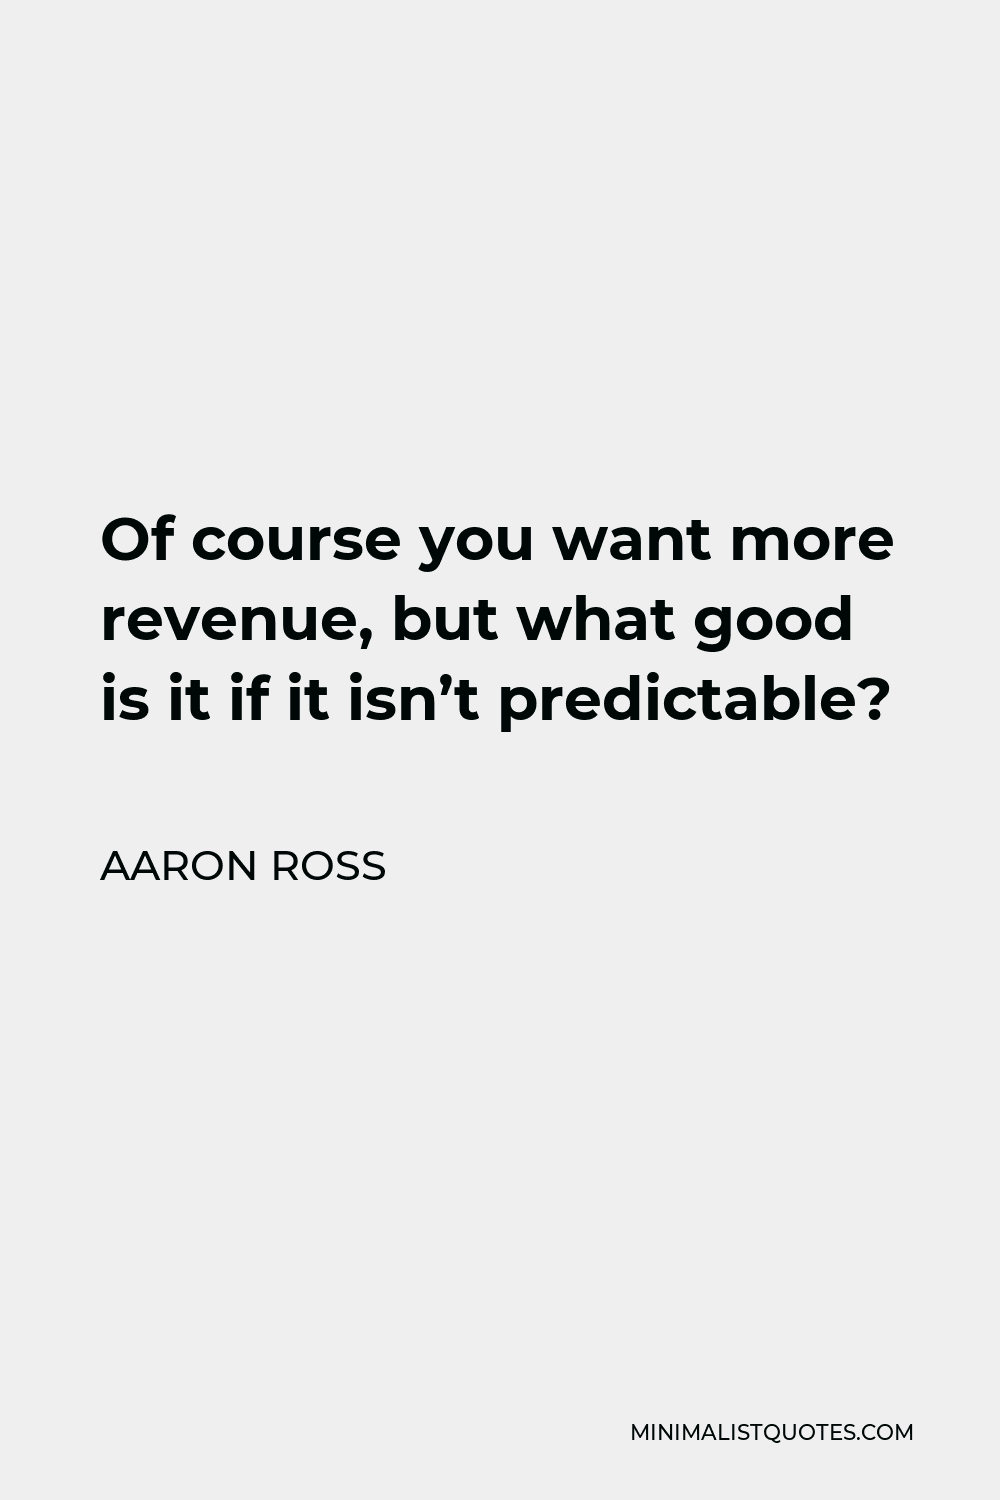 Aaron Ross Quote - Of course you want more revenue, but what good is it if it isn’t predictable?